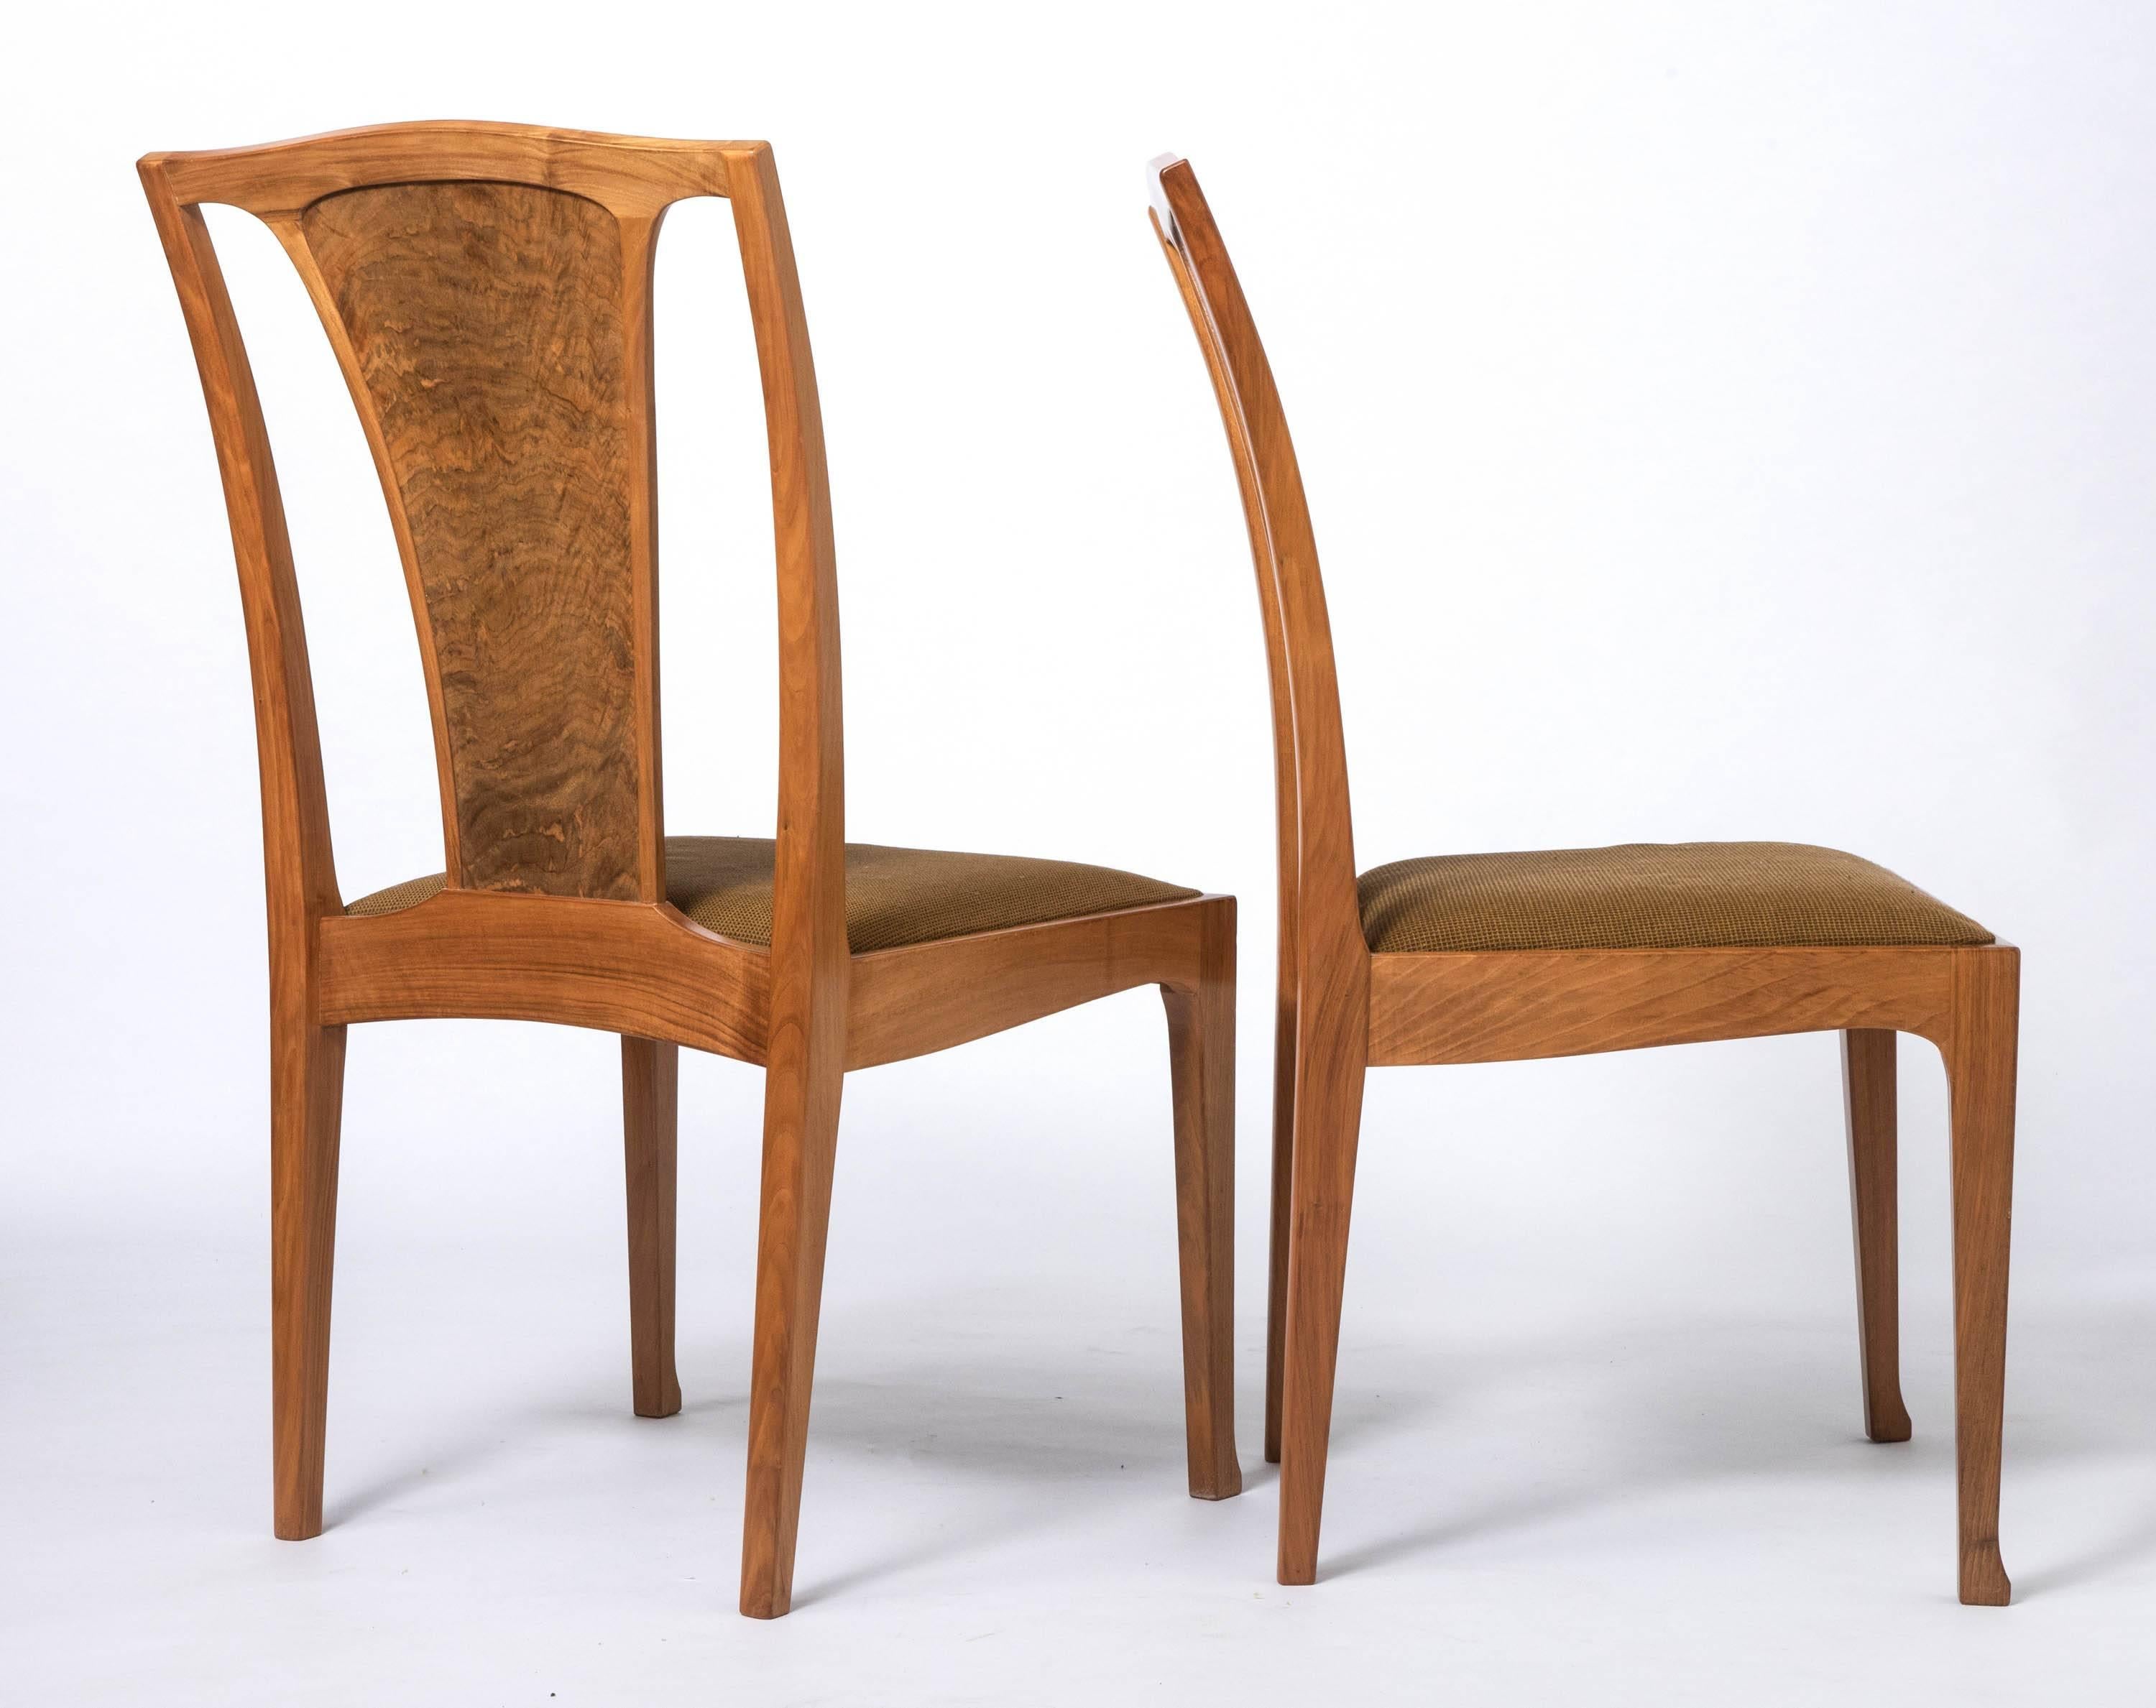 Mid-20th Century Pair of English Walnut Chairs by Edward Barnsley, England, circa 1969 For Sale